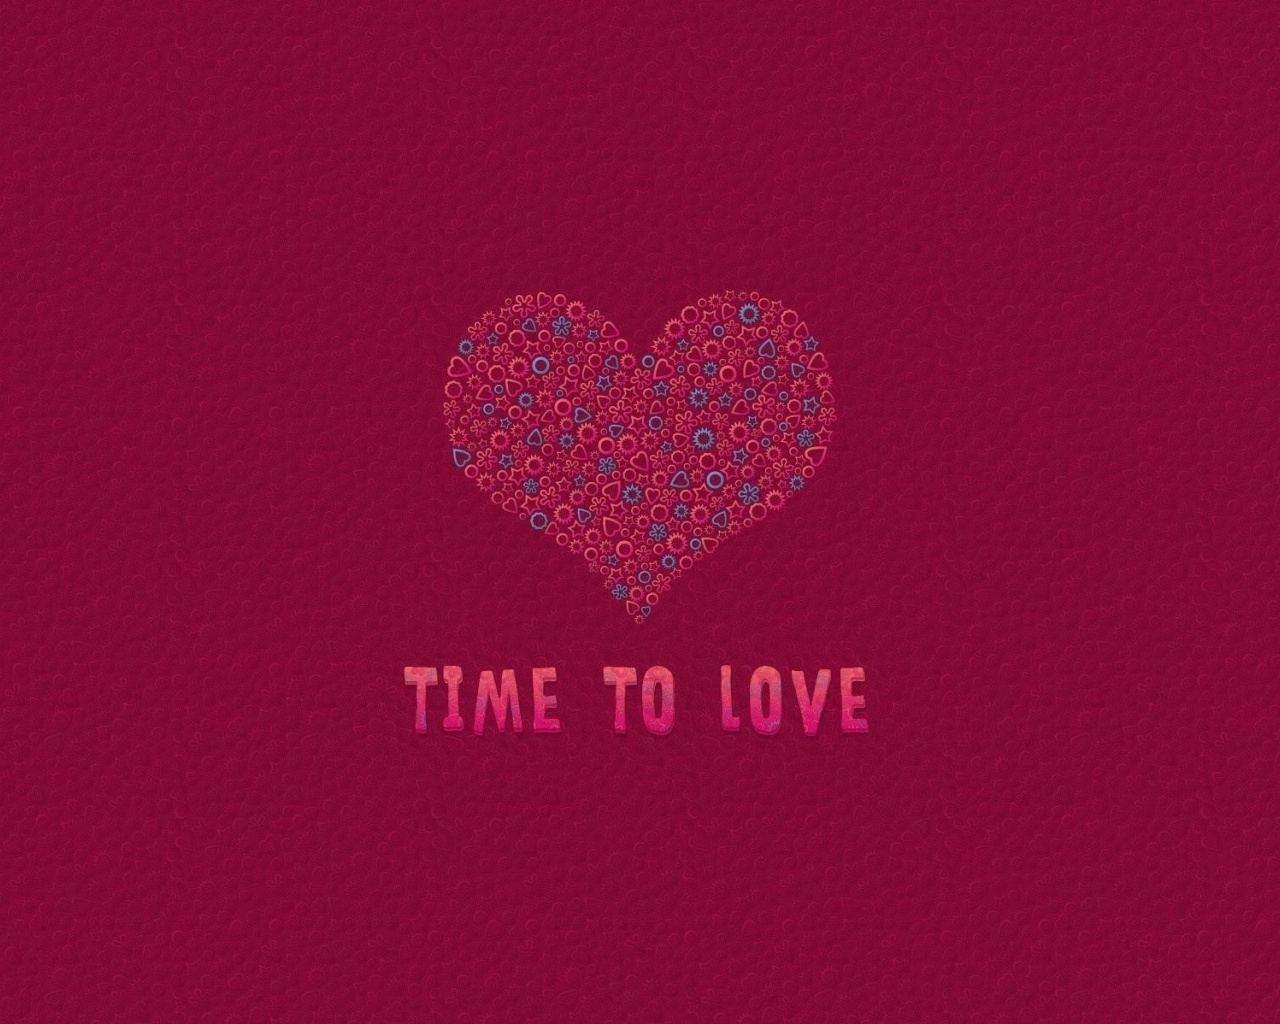 Time to Love wallpaper 1280x1024